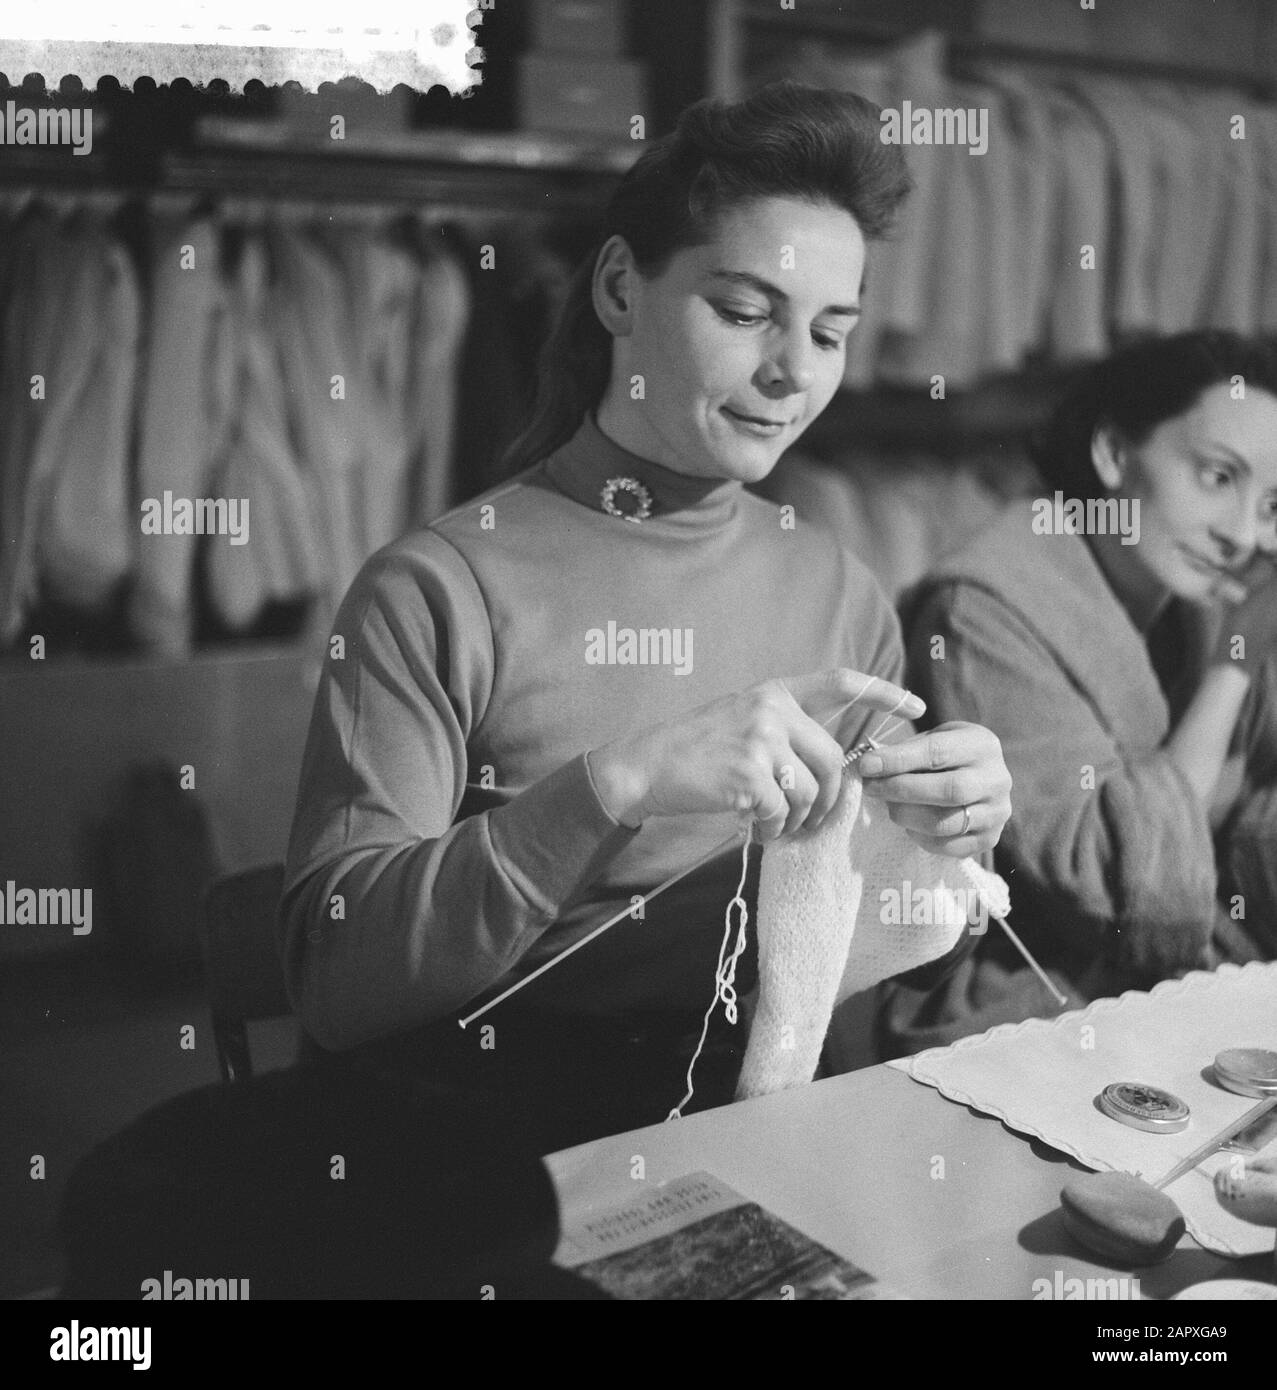 ASSIGNMENTS Vrije Volk, Holiday on Ice, recordings in the Changing rooms Annotation: Knitting skater Date: December 14, 1960 Location: Rotterdam Keywords: Knitting, Ice Dancing, Revues Institution name: Holiday On Ice, Vrije Volk Foto Stock